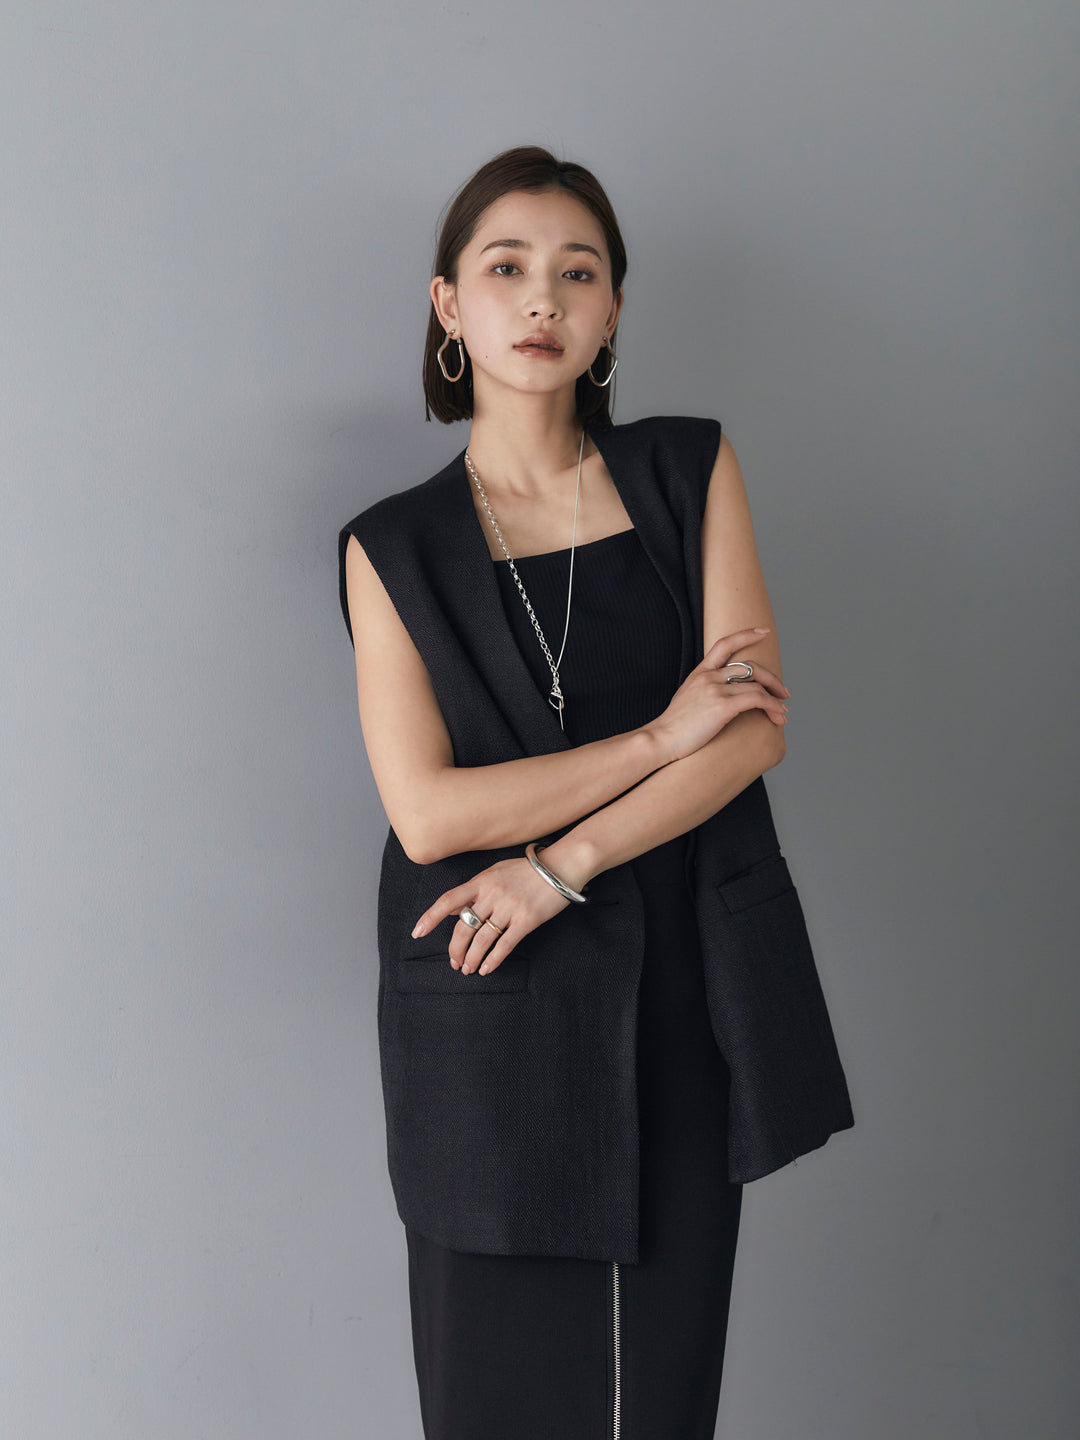 [SET] Linen touch no-collar gilet + telekorib bare camisole + front zip knit tight skirt (3 sets)